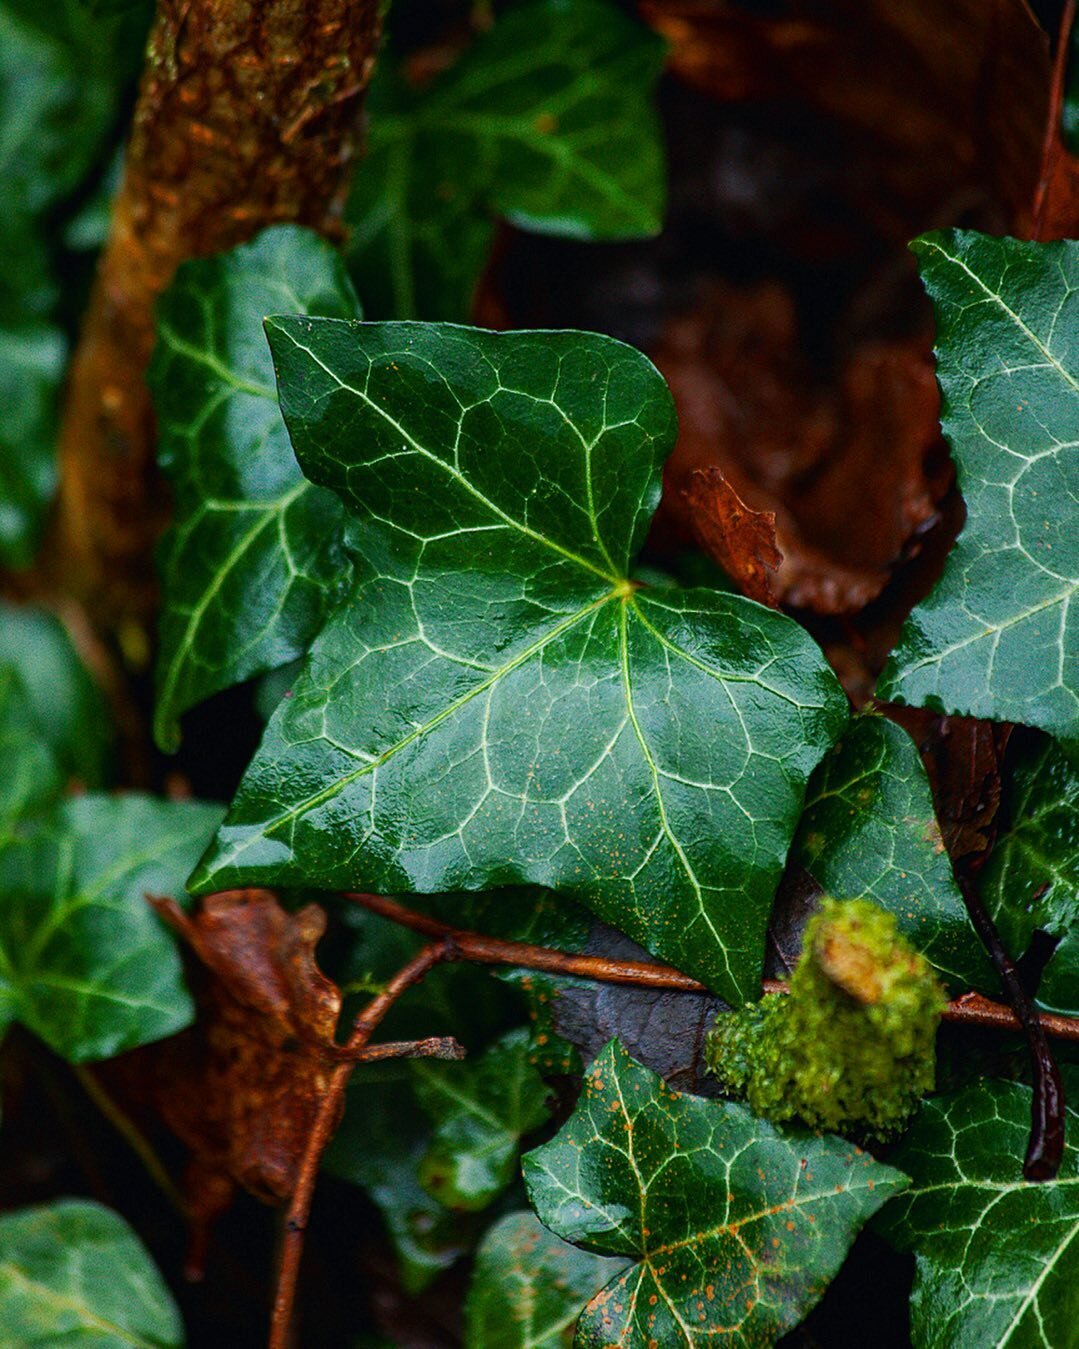 #Ivy dripping with morning moisture, lush with life despite this cloudy winter.